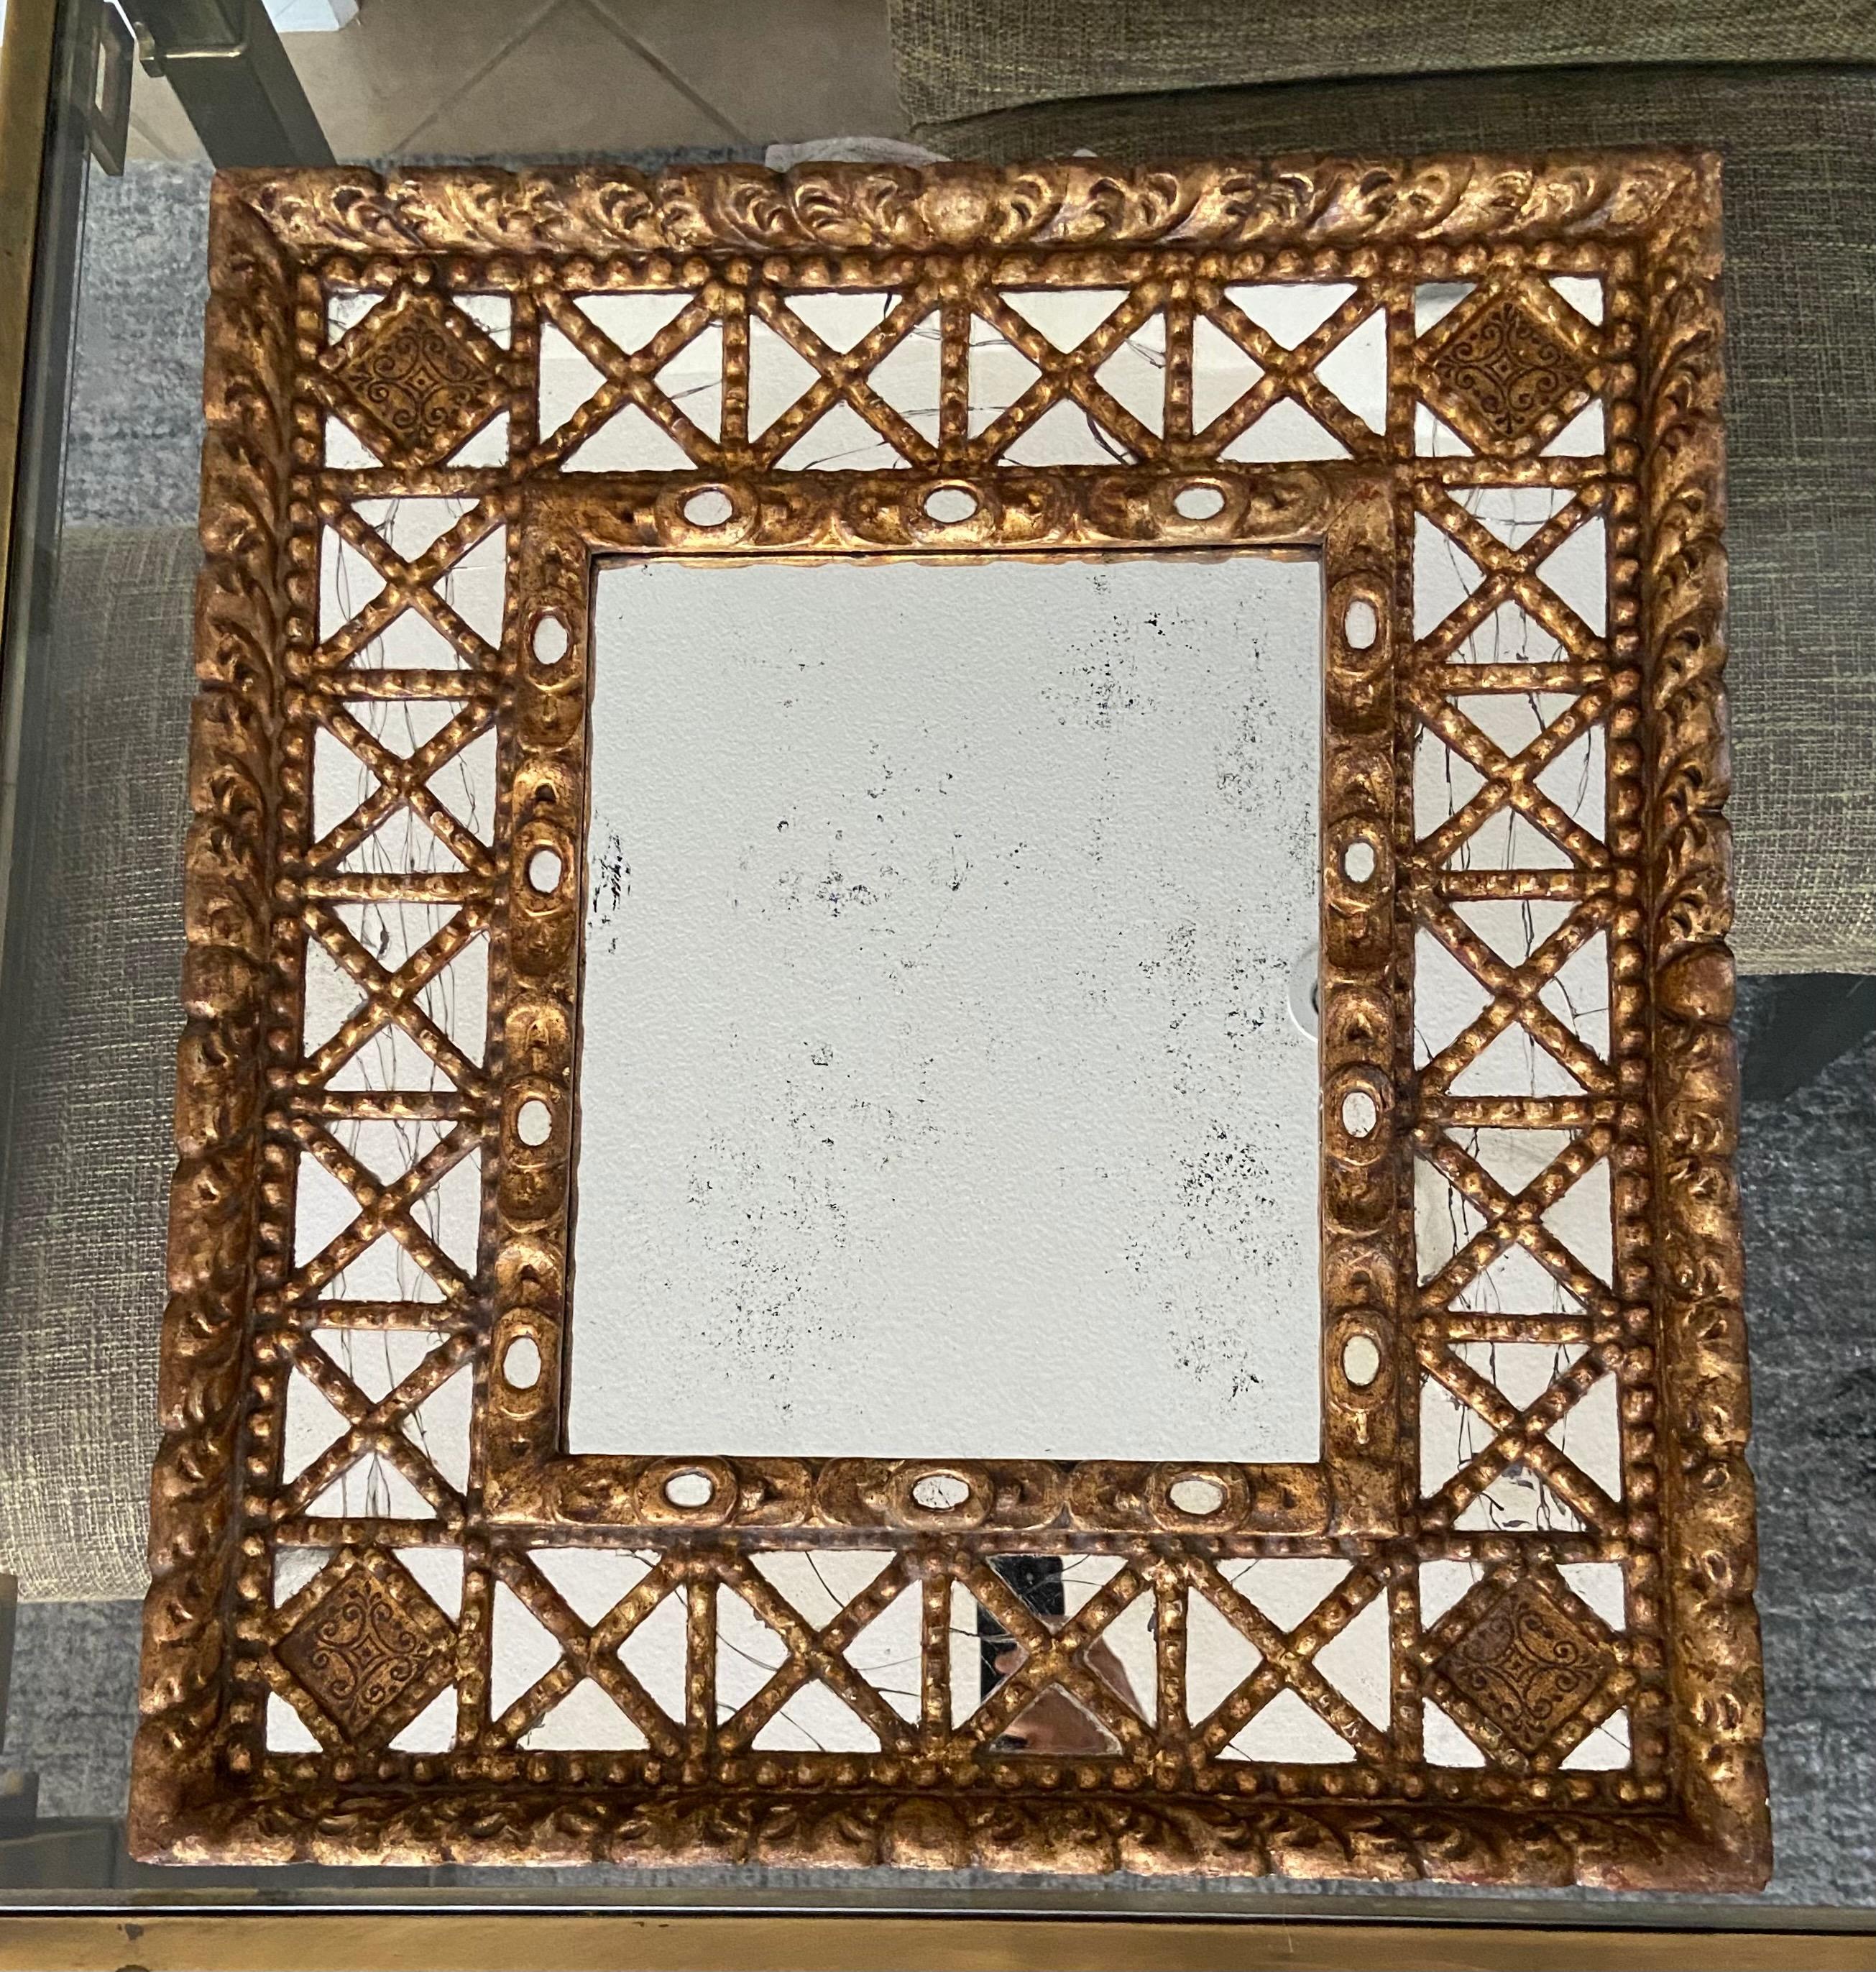 Handsome Spanish Colonial wall mirror in gold giltwood and gesso finish. Large center mirror has lots of antiqued age spots, smaller inset mirrors have a craquelure finish. Nice rustic detailing throughout. Slight rectangular shape.
The larger